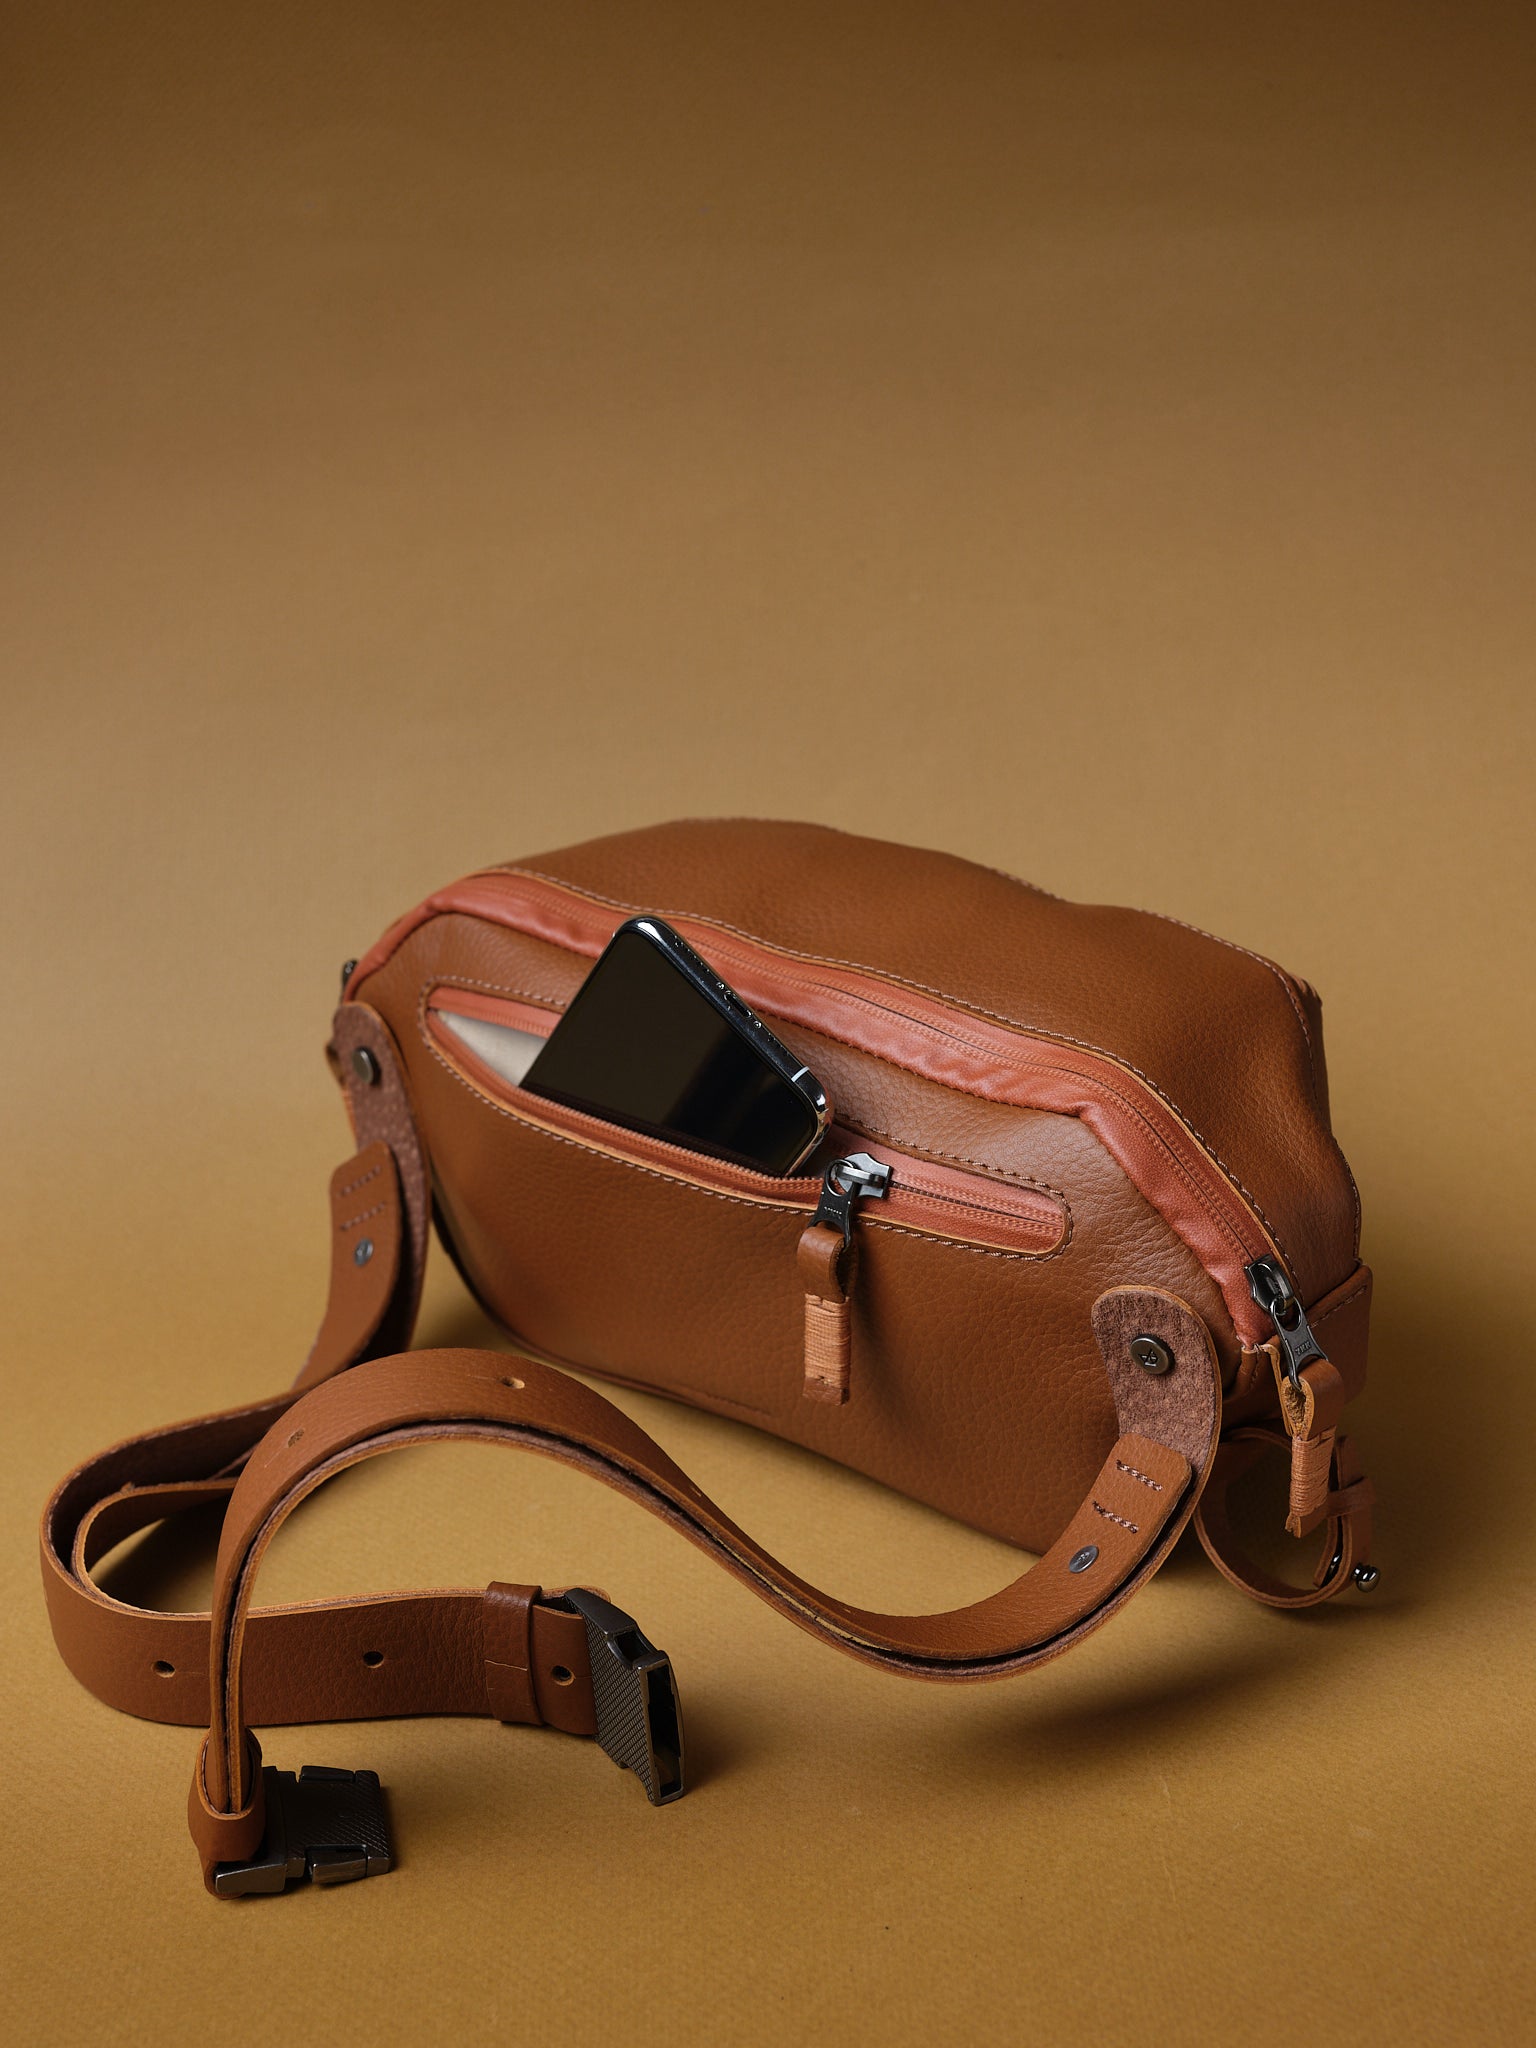 Fanny Pack. Urban Sling Bag Tan by Capra Leather